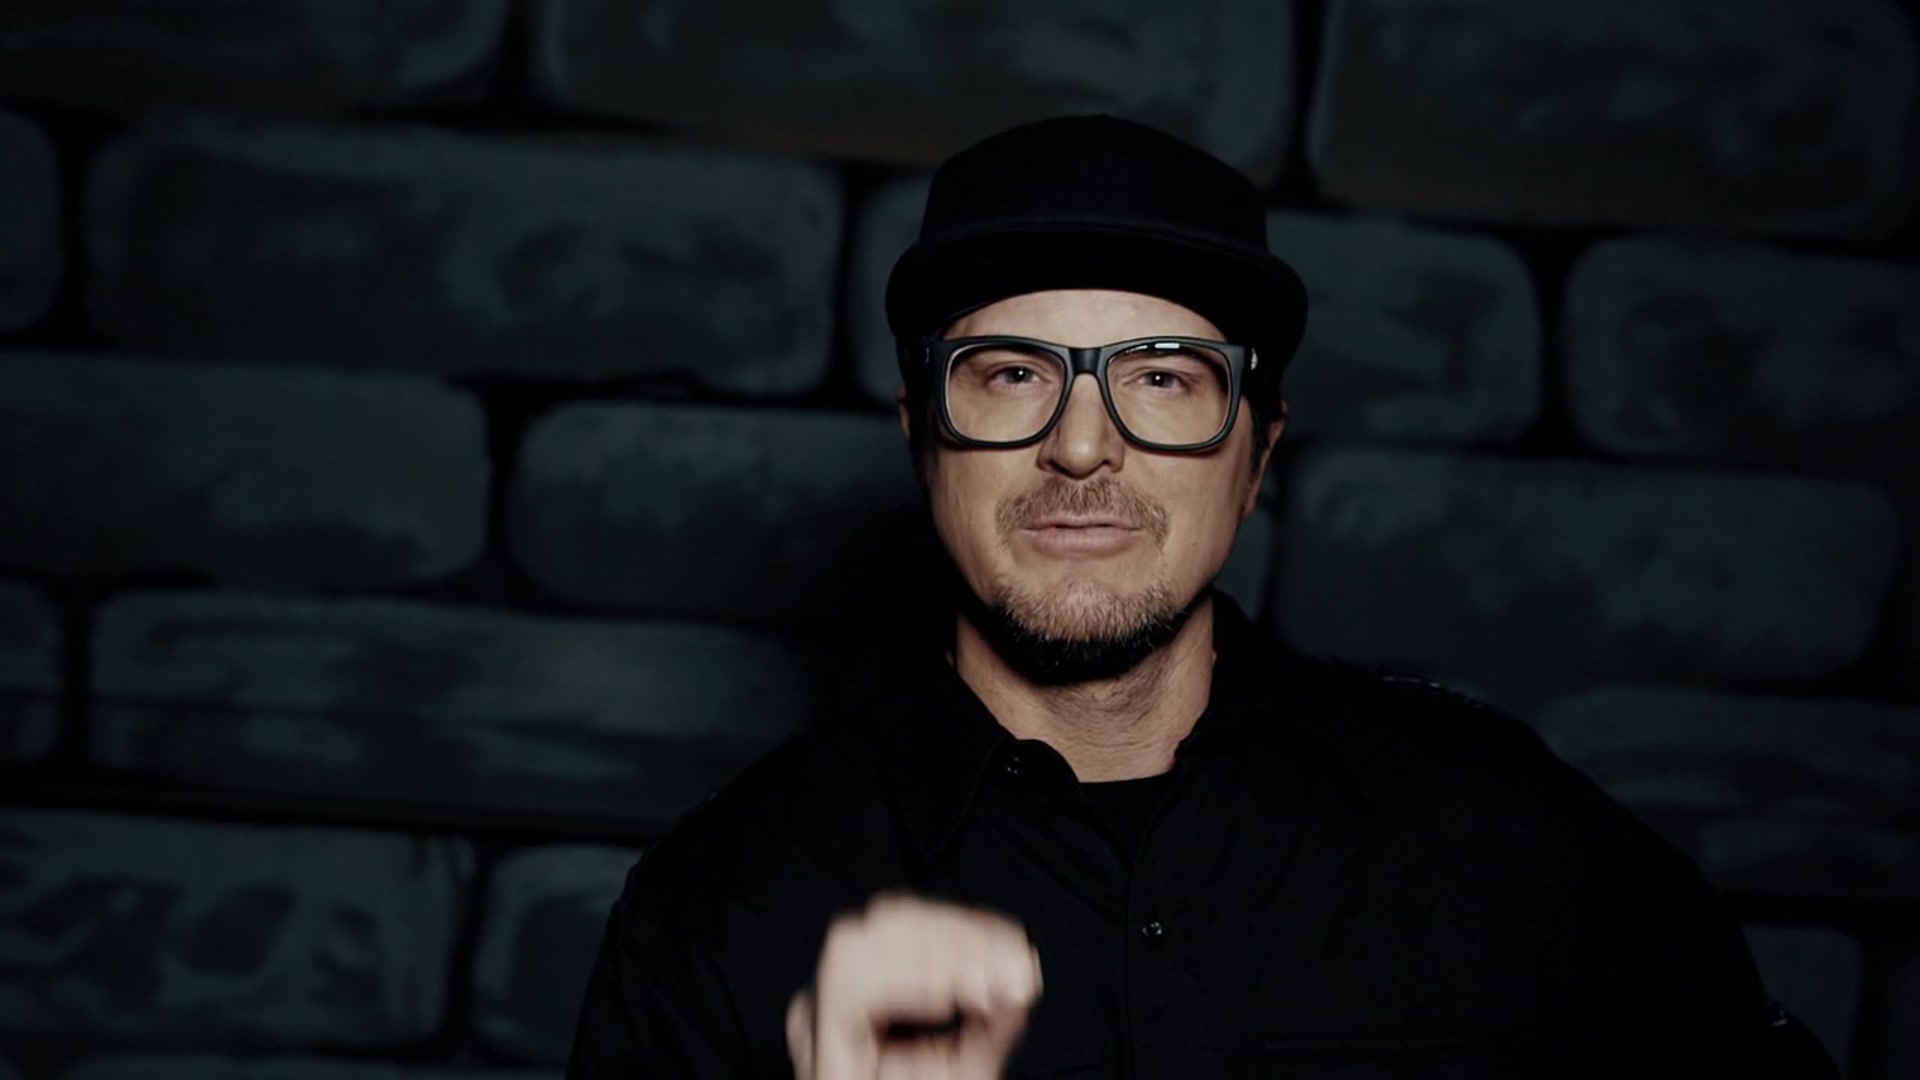 Zak Bagans is an American paranormal investigator, actor, and producer. 